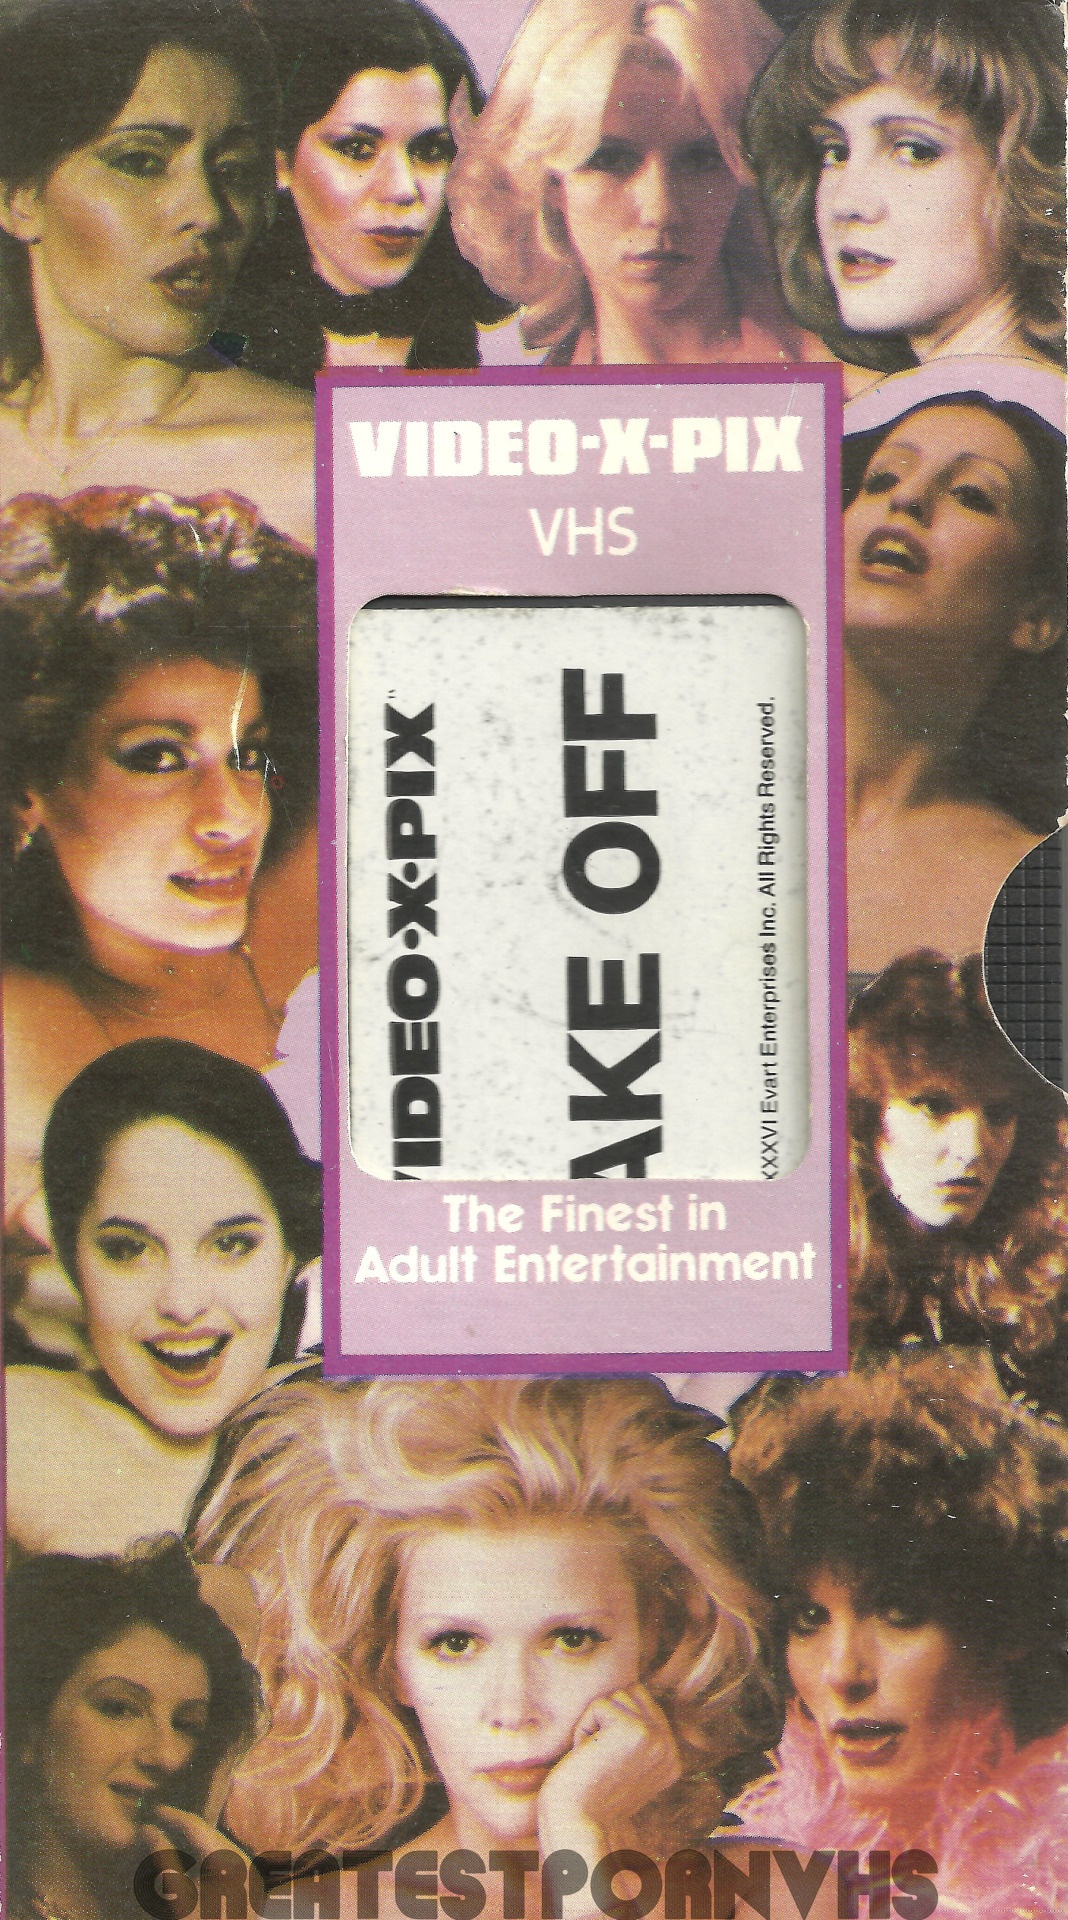 Porn Vhs Covers - The Greatest Blog About Porn On VHS - Take Off, Video-X-Pix ...